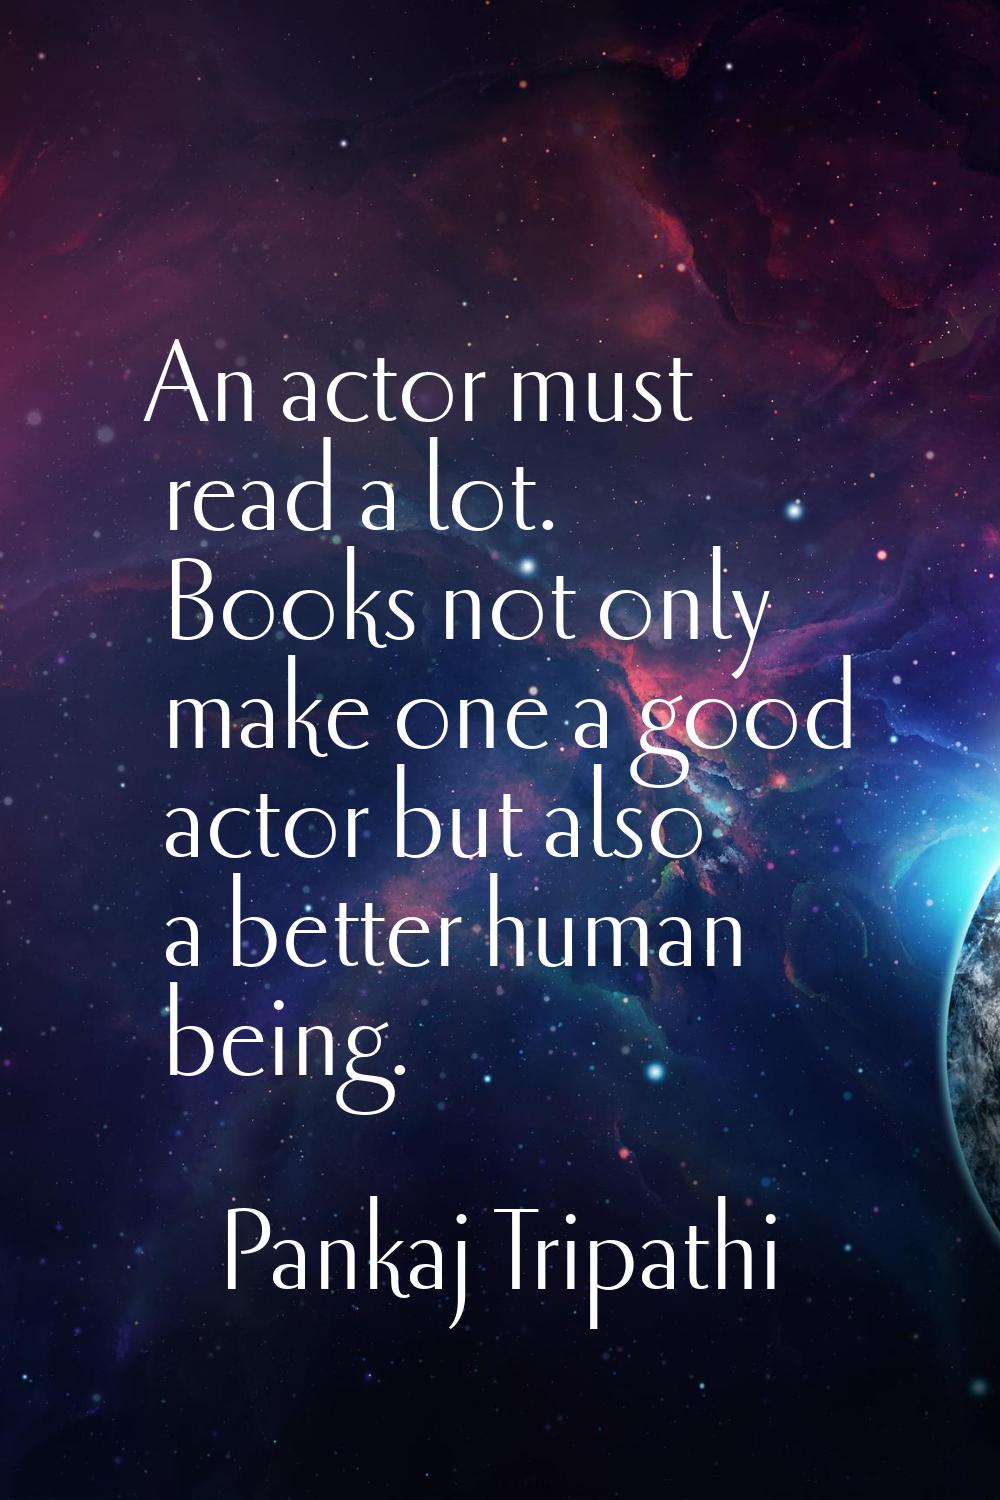 An actor must read a lot. Books not only make one a good actor but also a better human being.